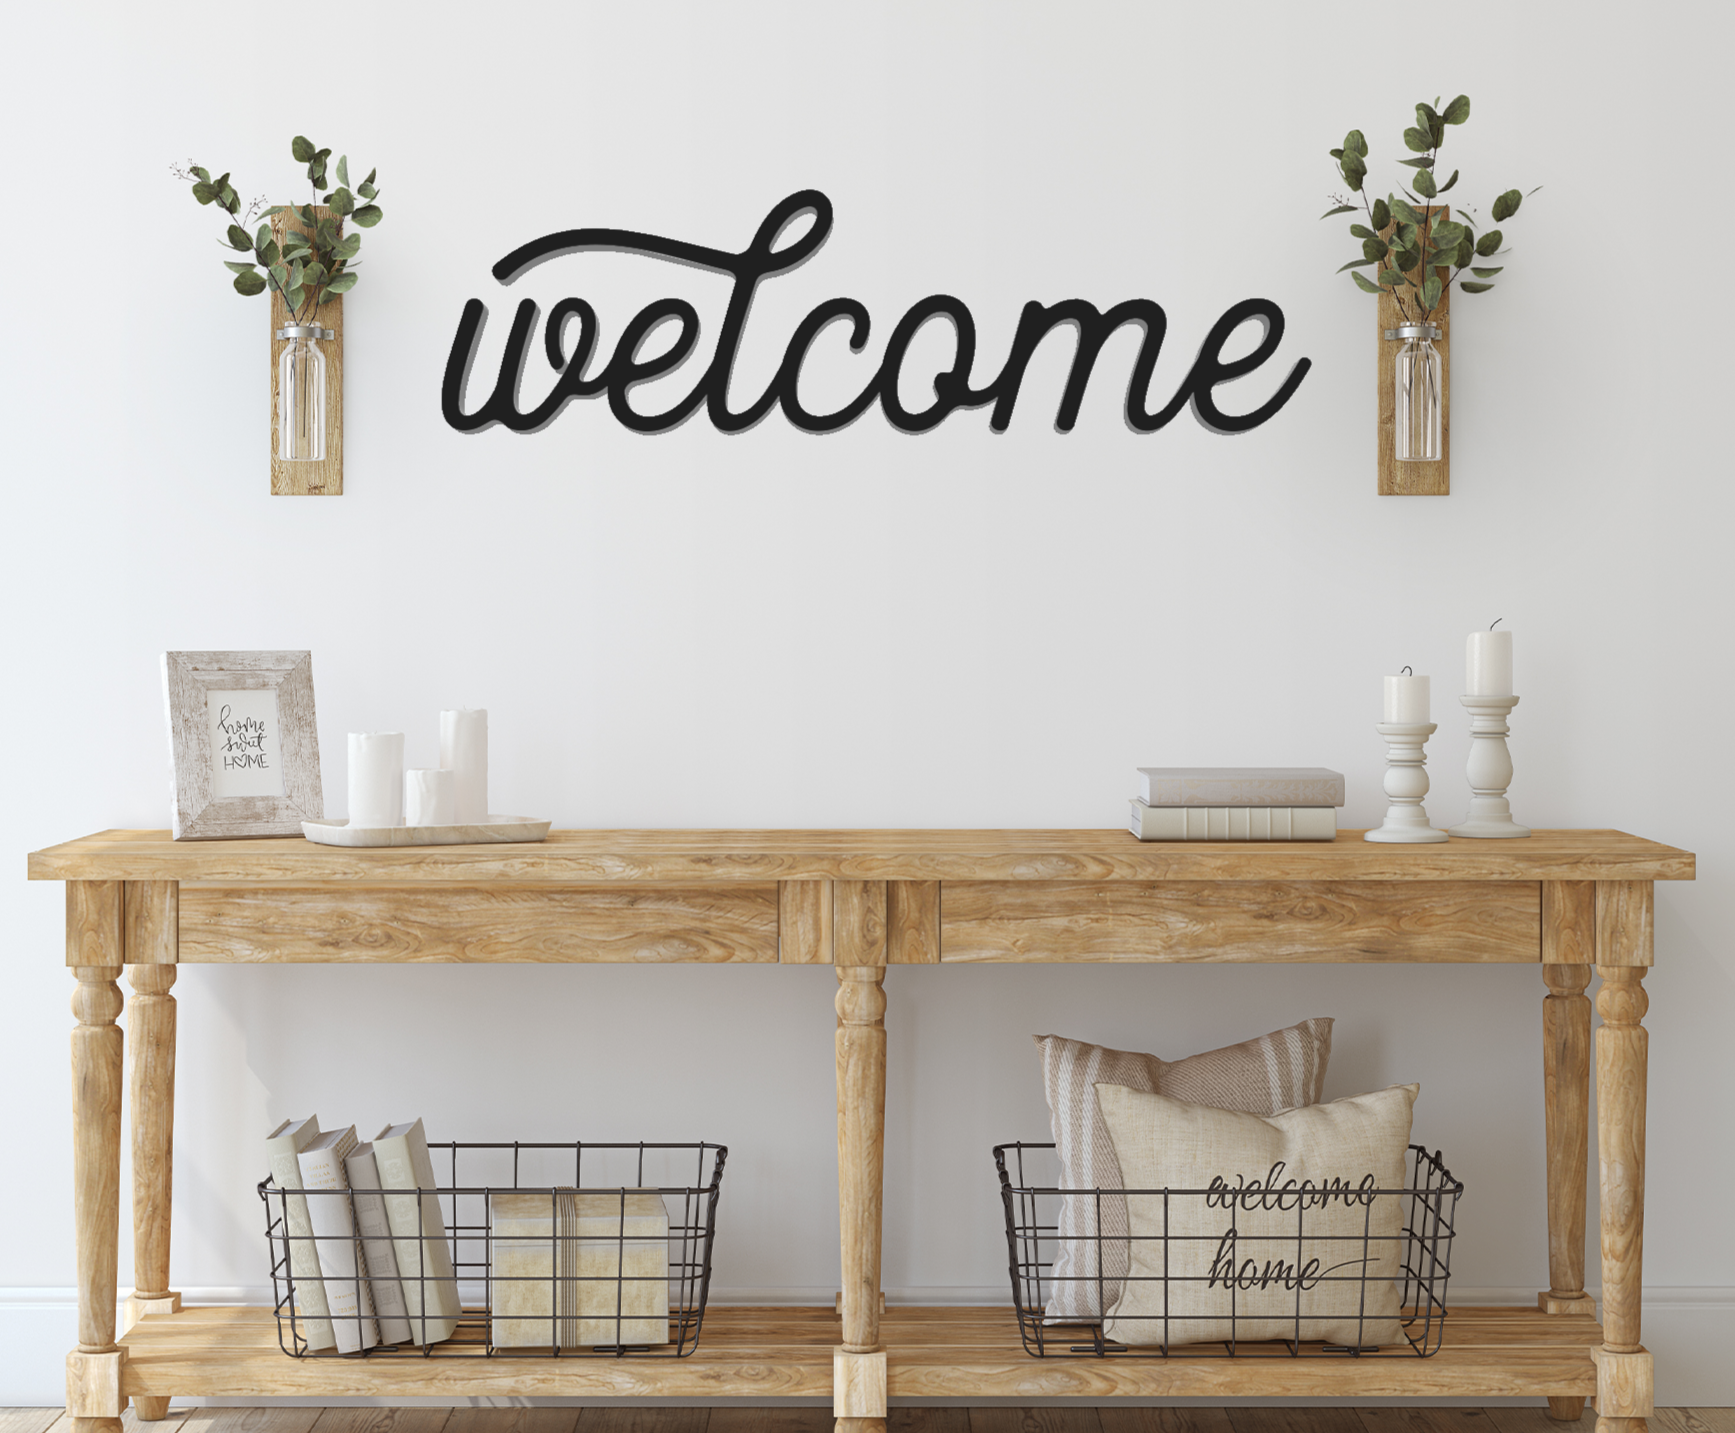 Welcome 3D cut out